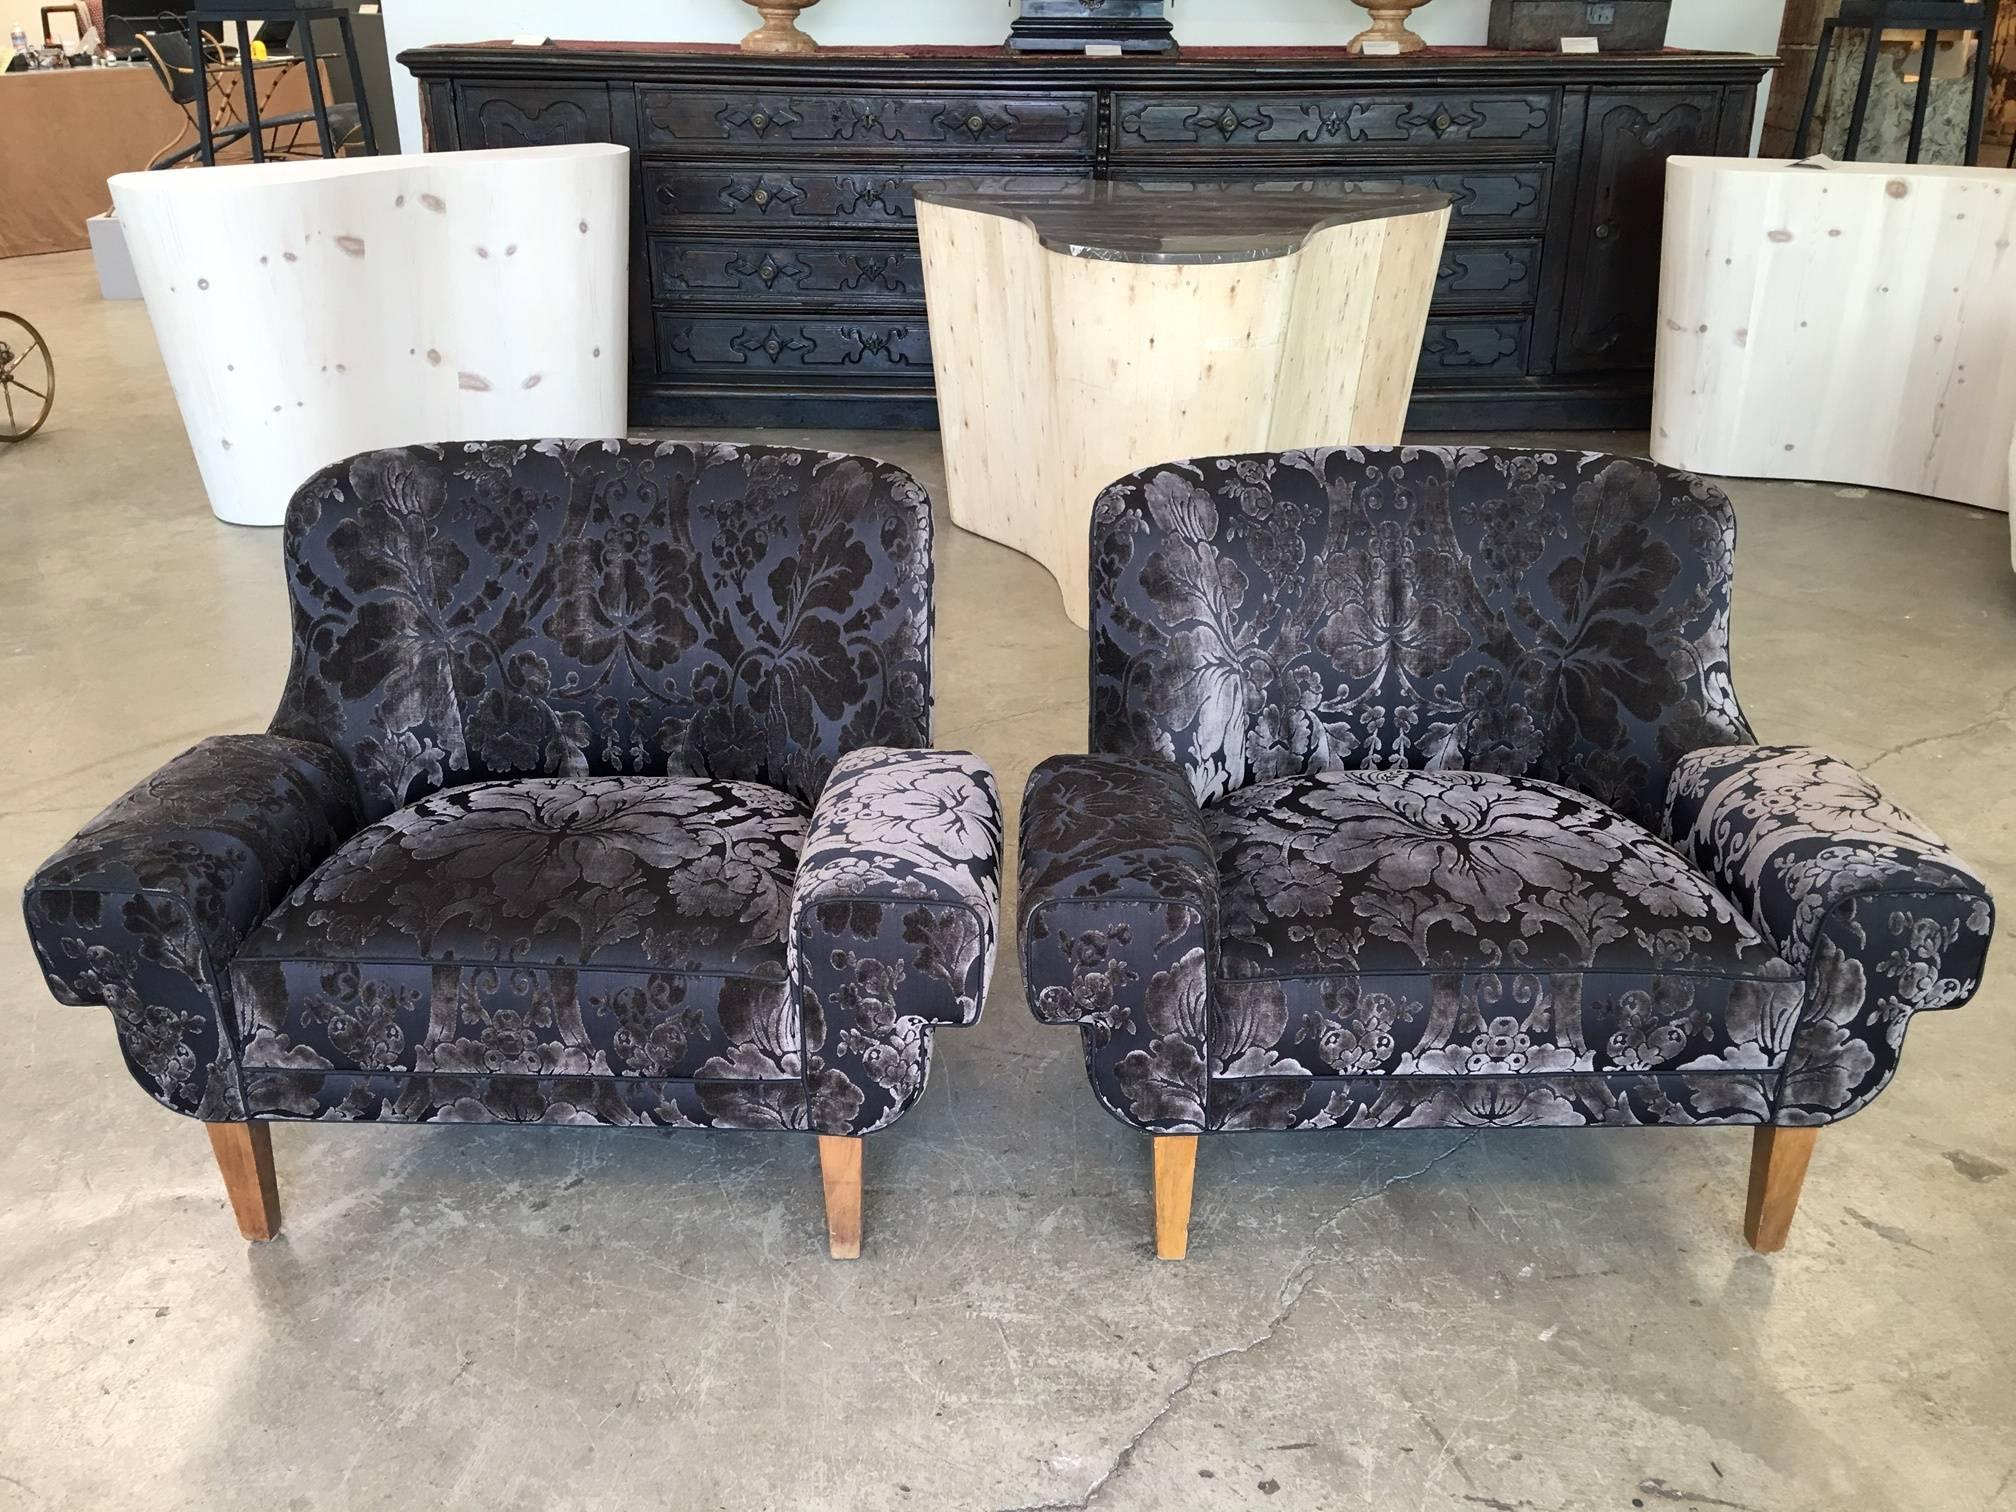 Pair of custom armchairs by Paul Laszlo. Newly upholstered in luxurious damask velvet.